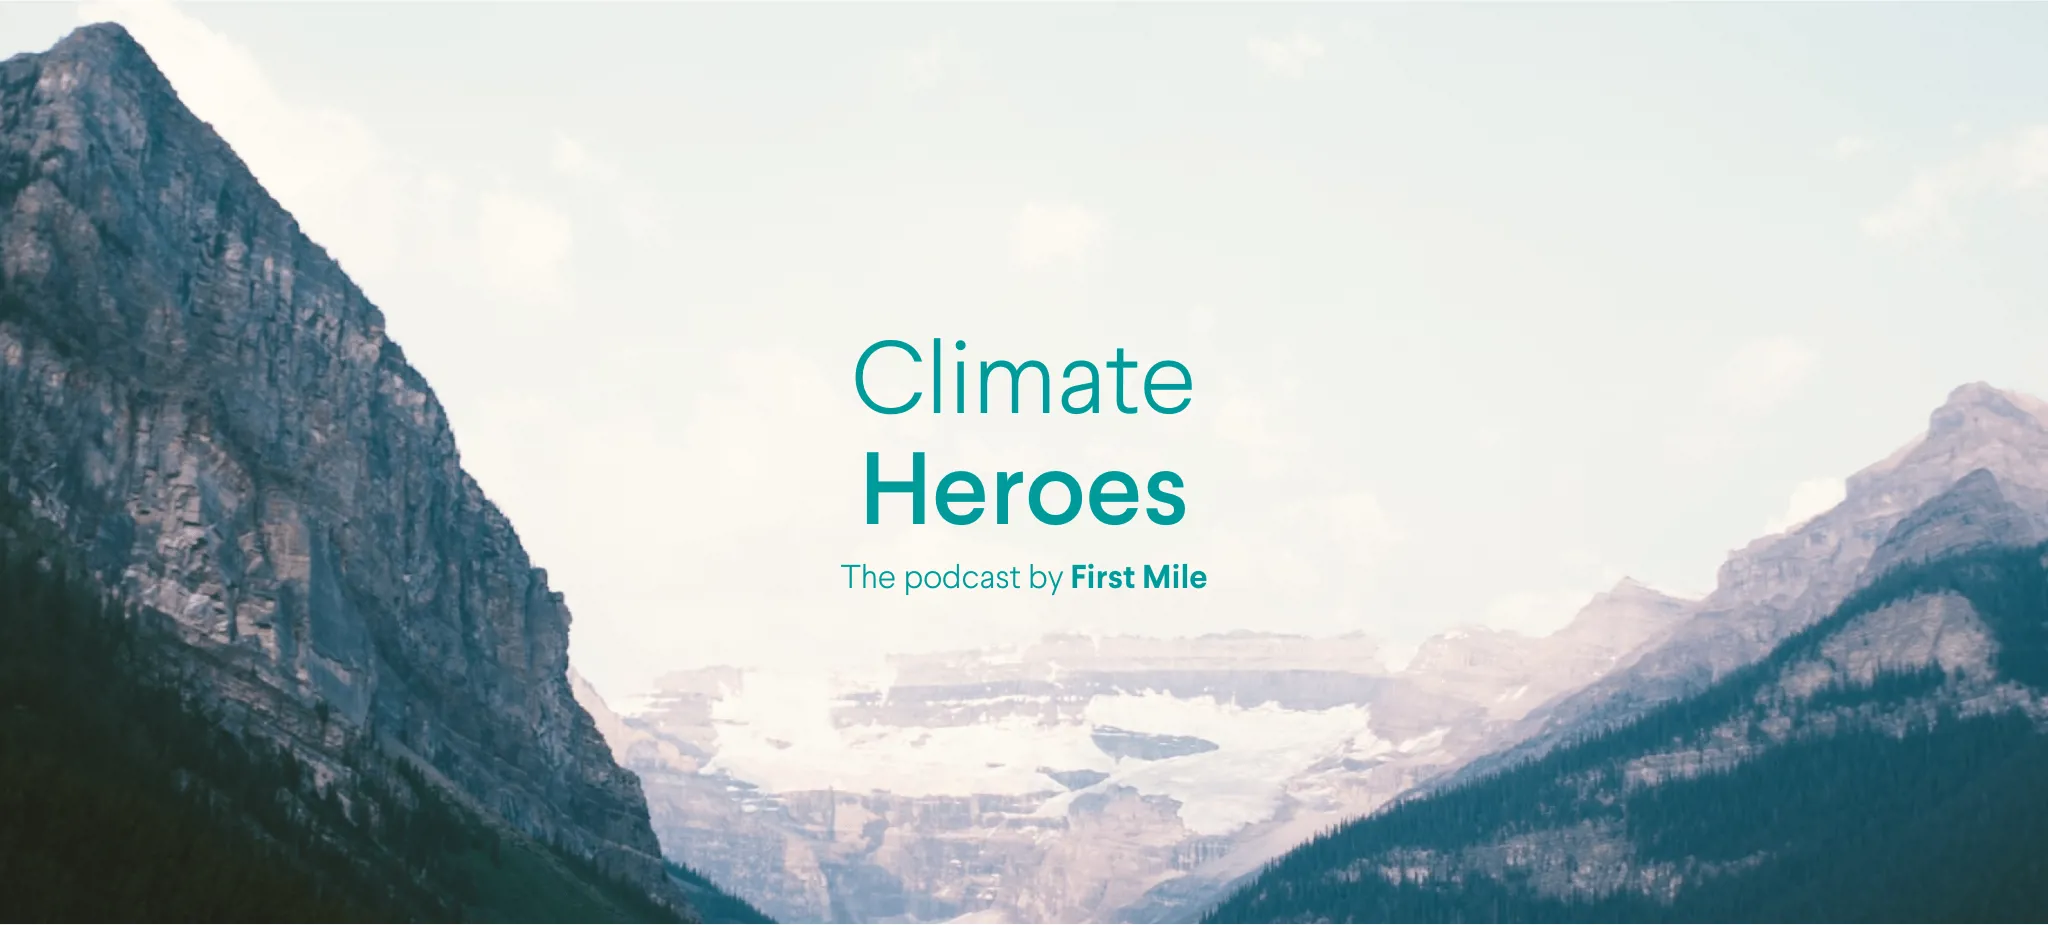 Meet our Climate Heroes - Season 4 round-up